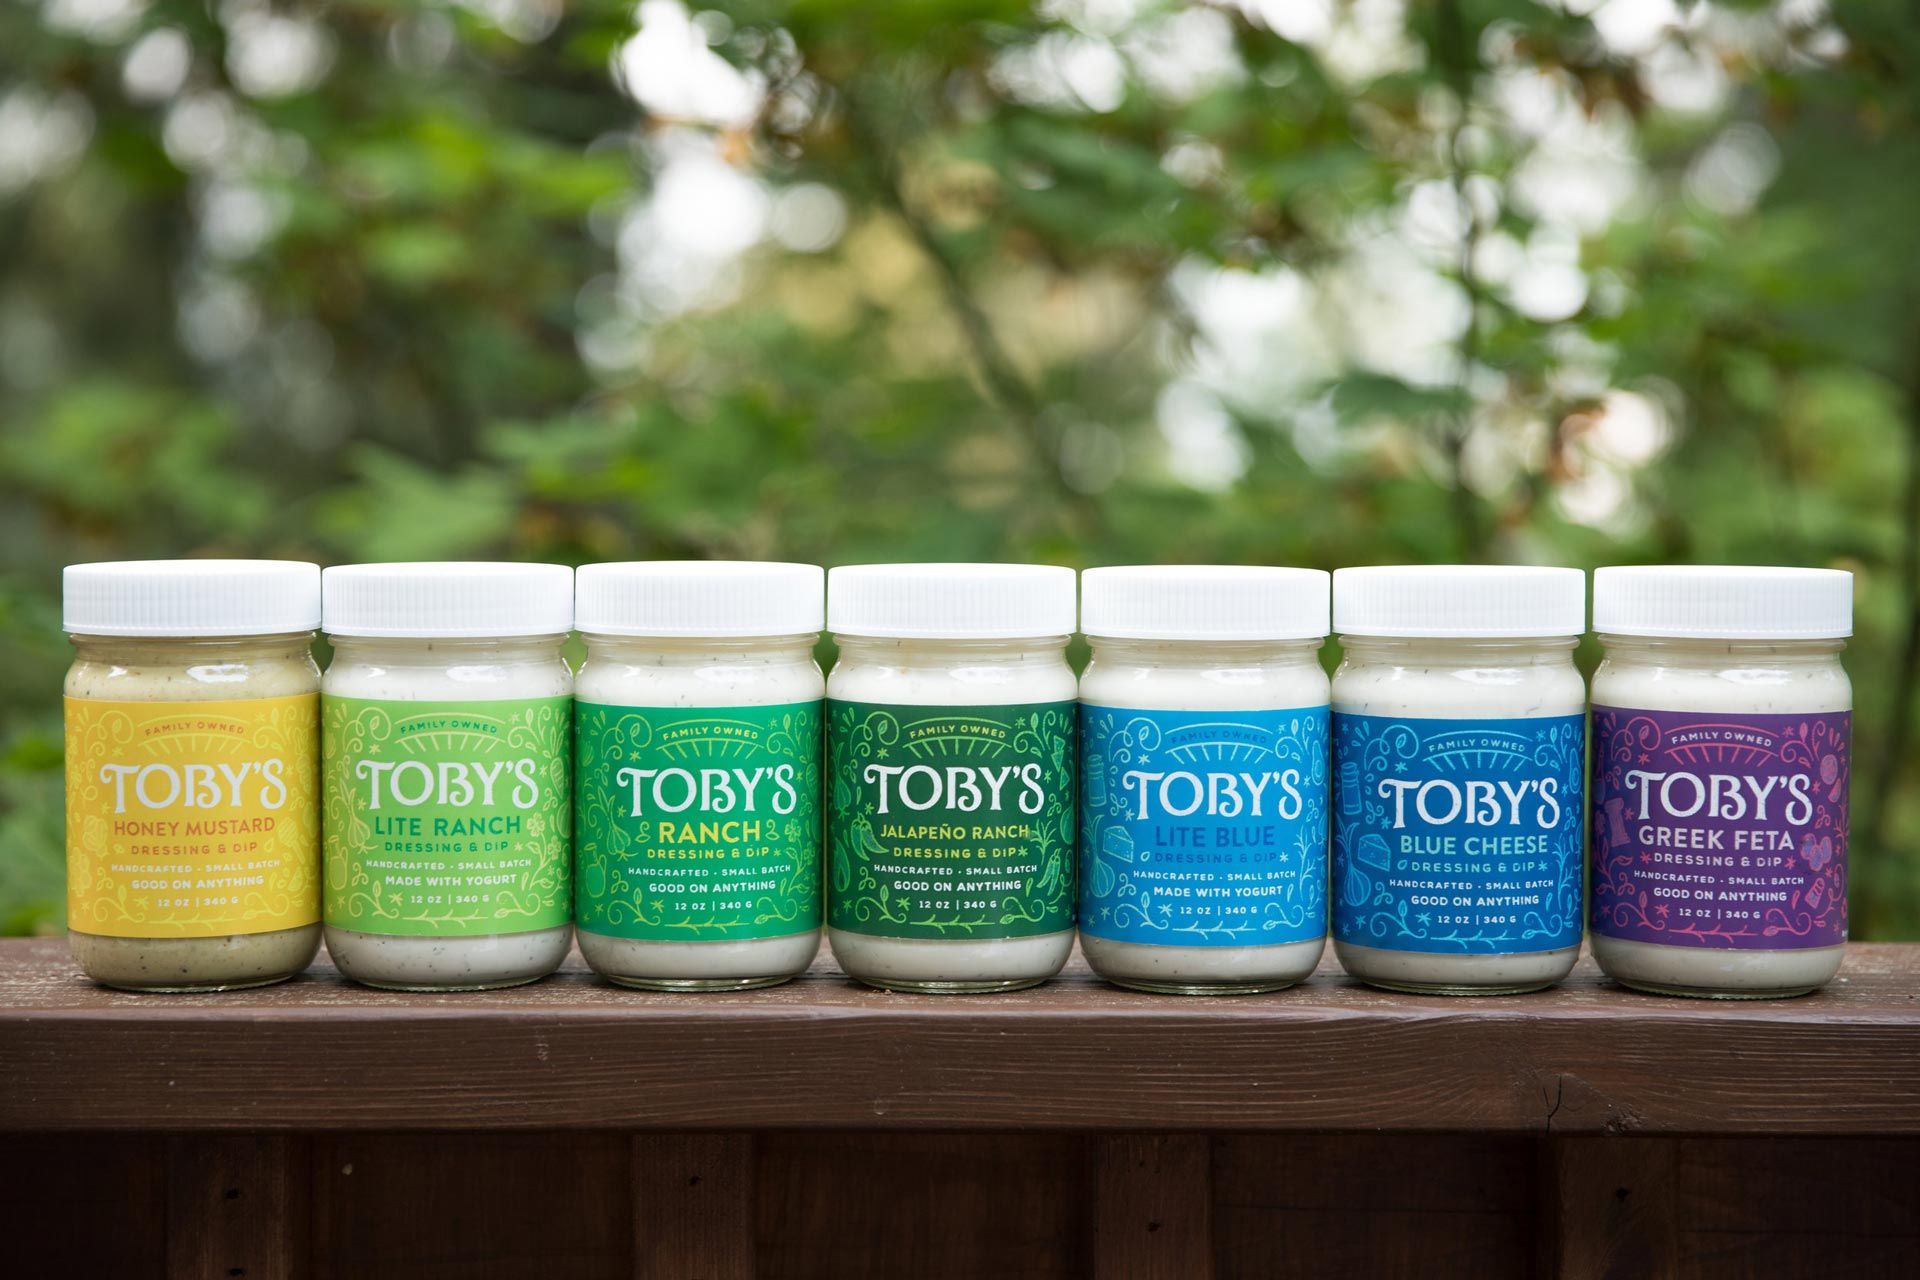 Toby's Dressing & Dip family of products